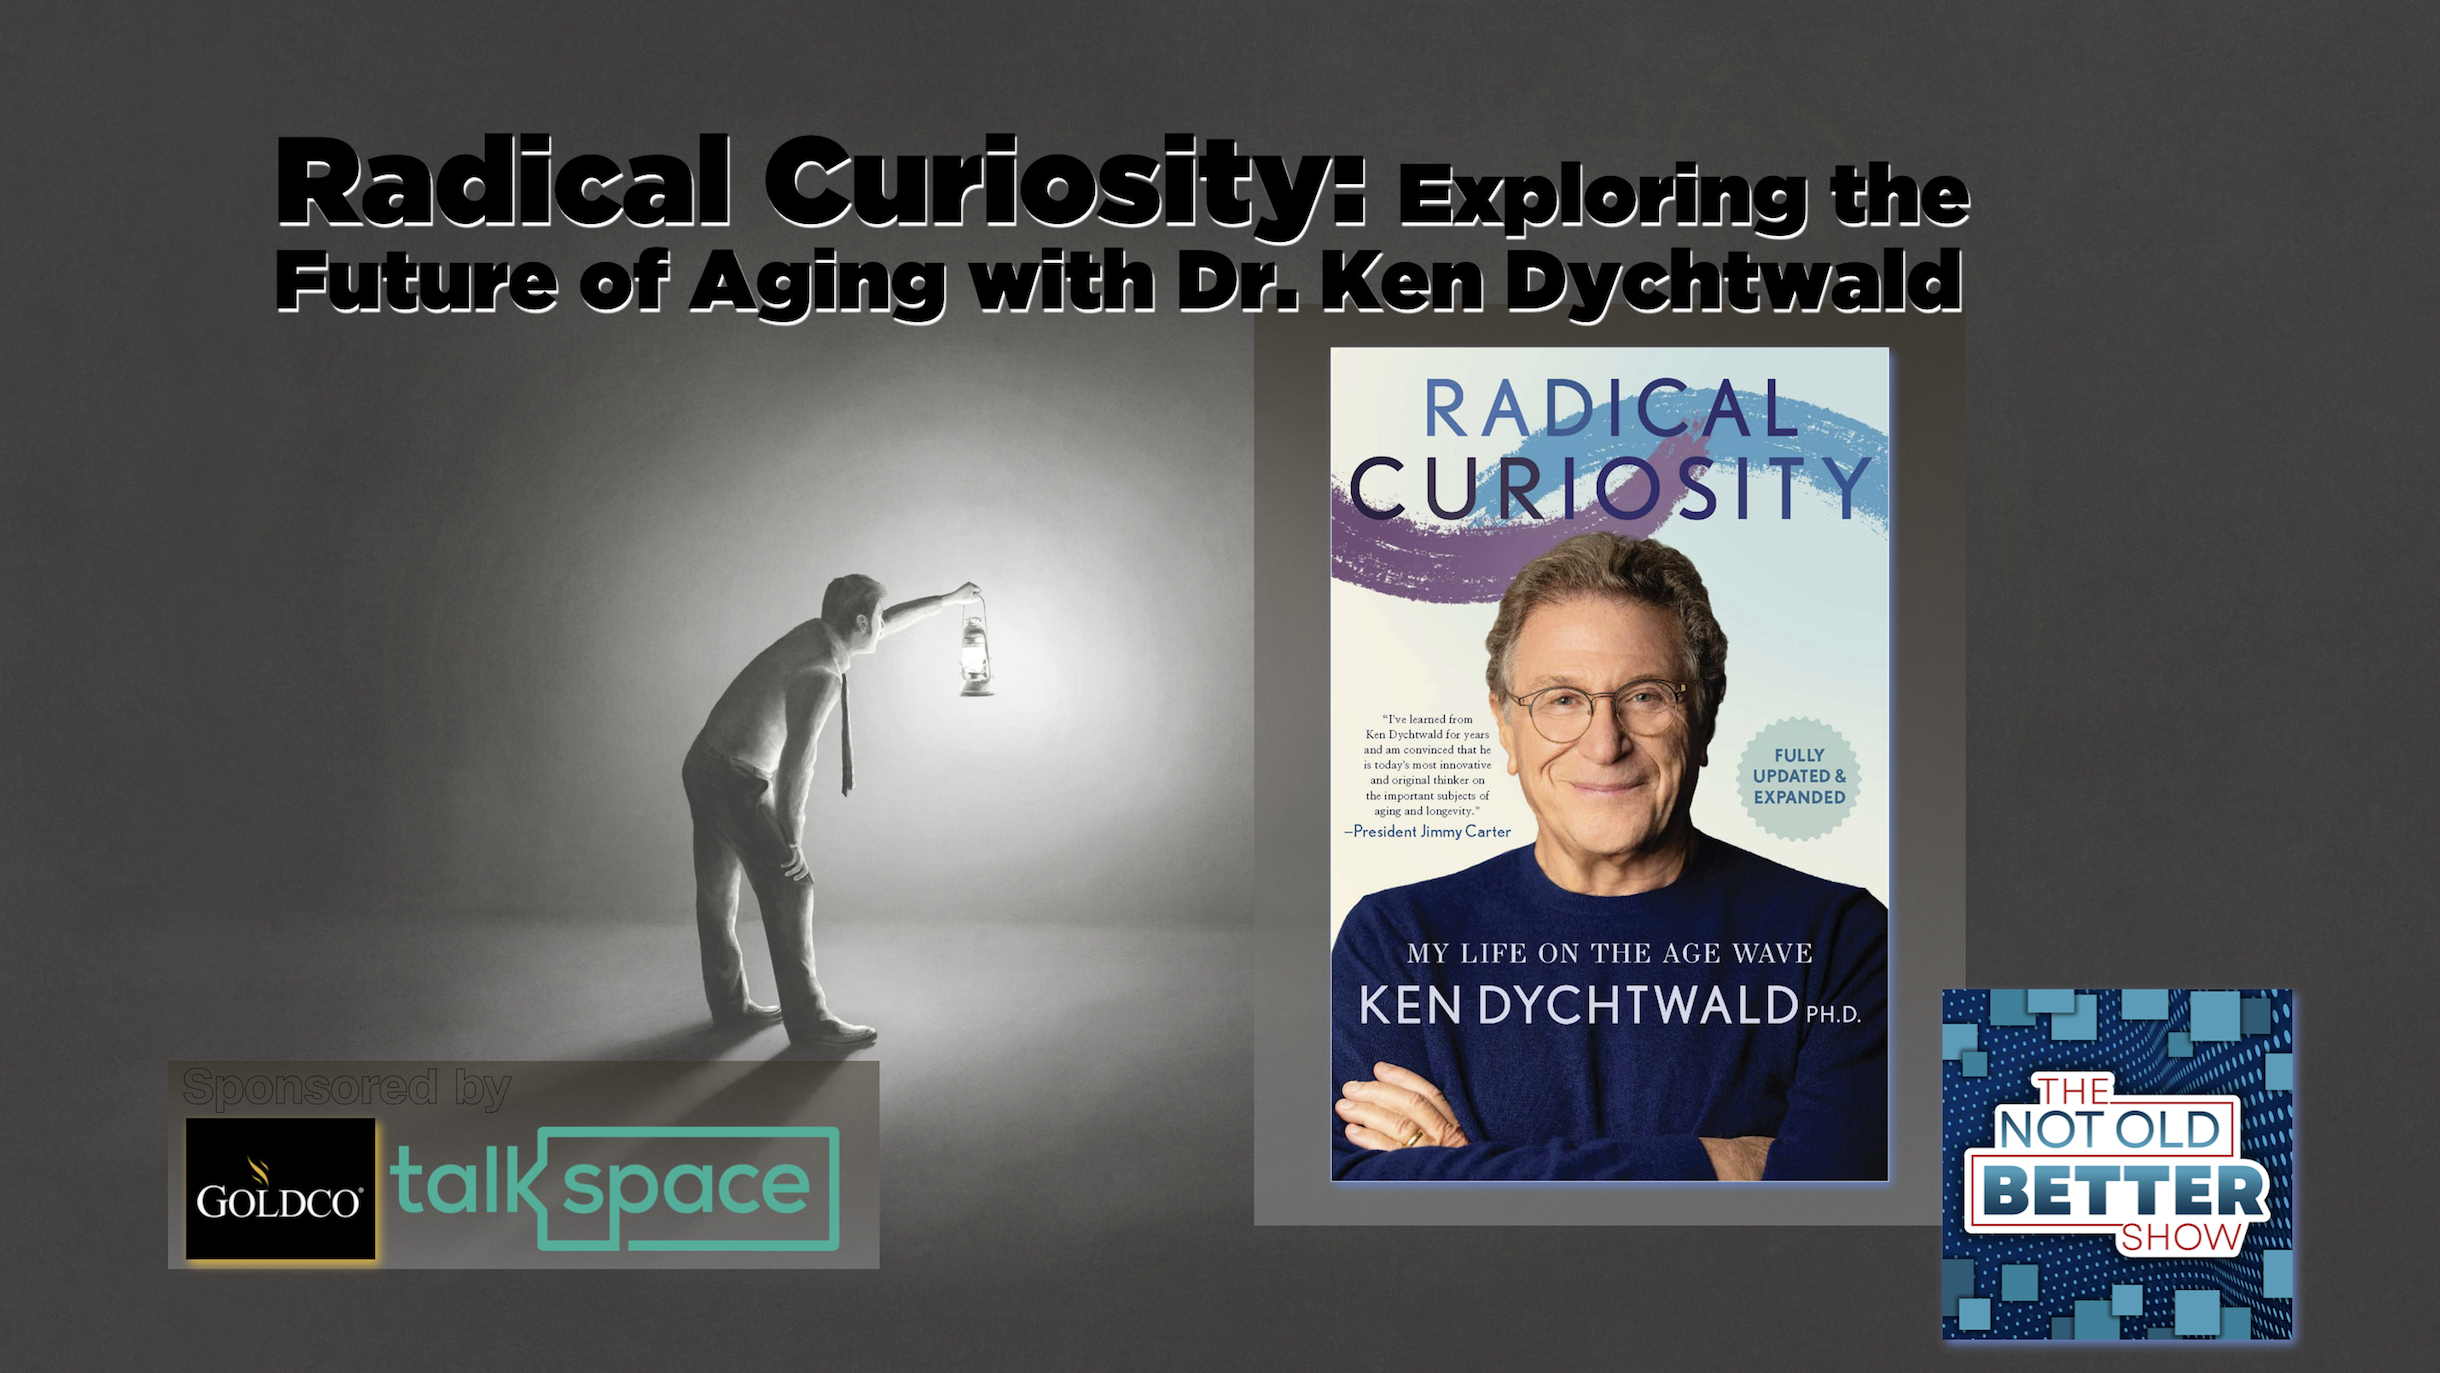 Radical Curiosity: Exploring the Future of Aging with Dr. Ken Dychtwald